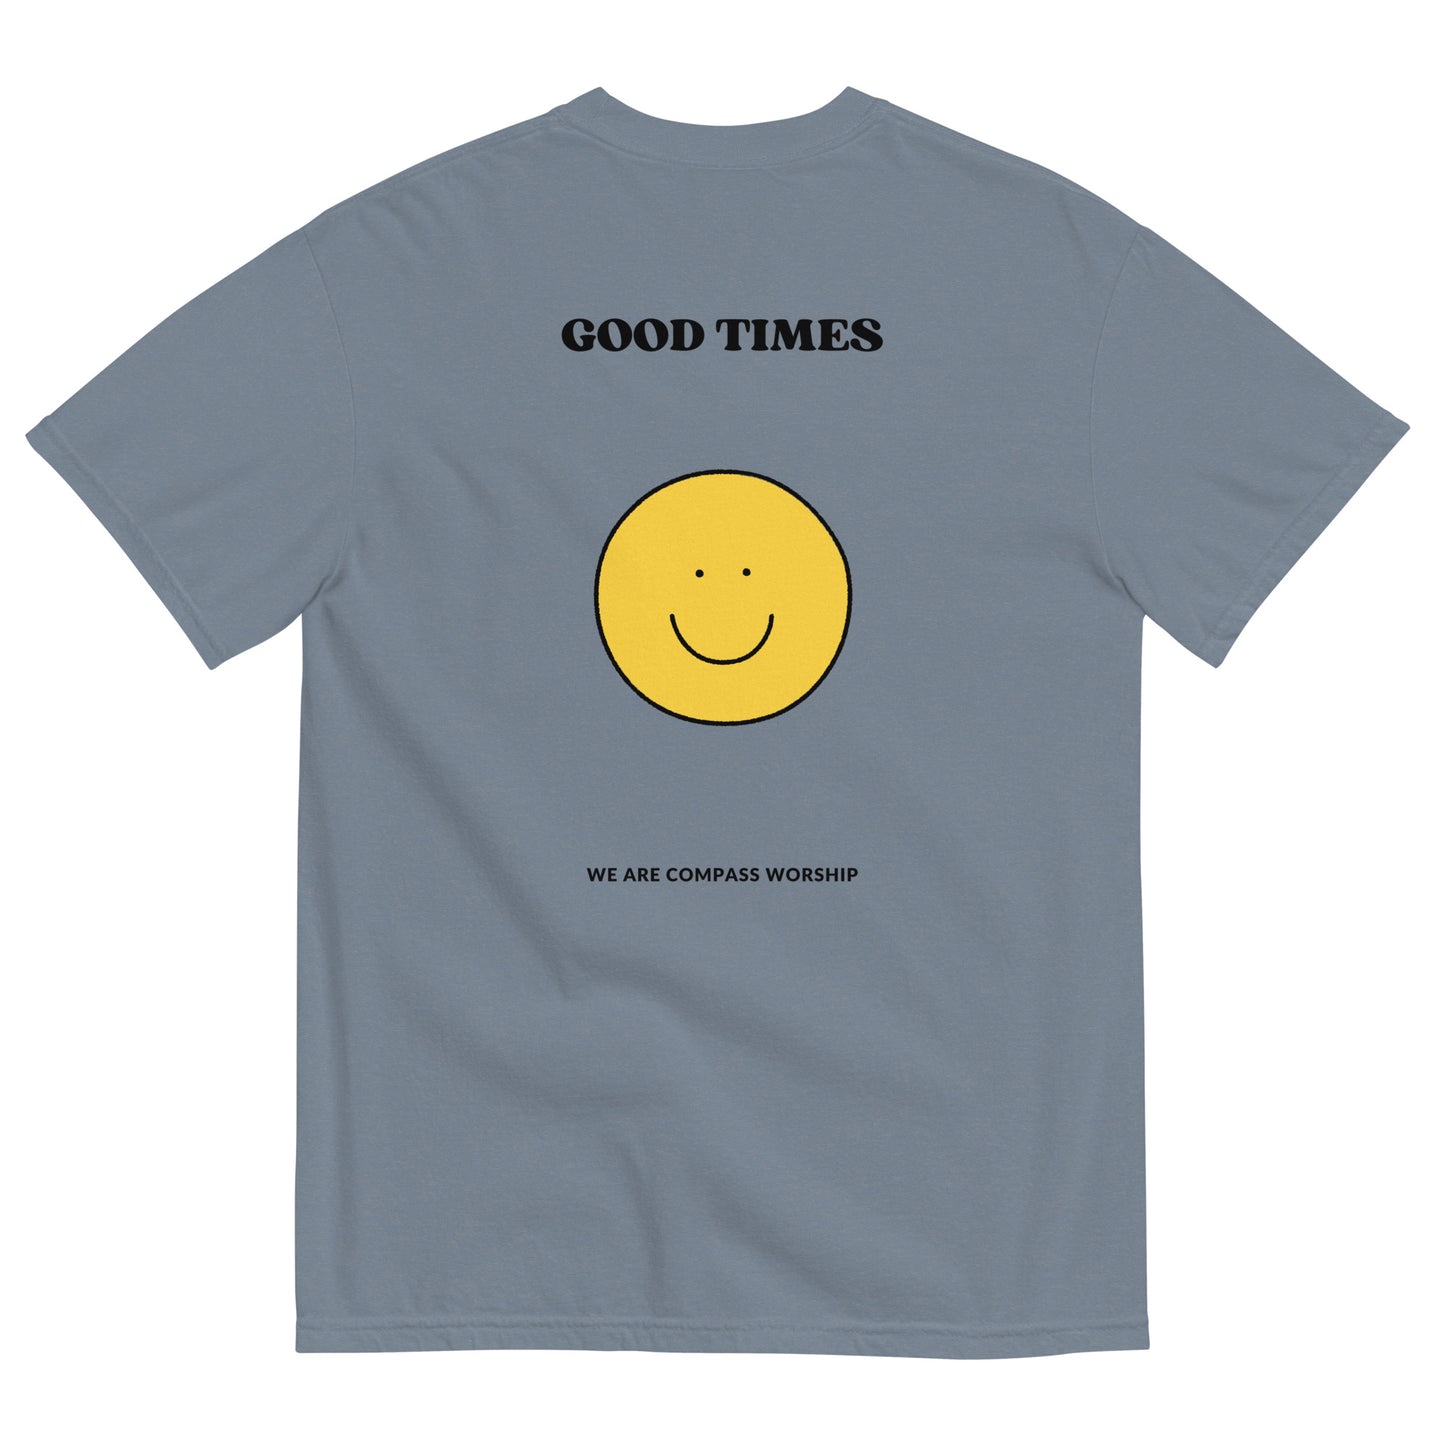 Black Embroidered Praise! (Good Times) T-Shirt